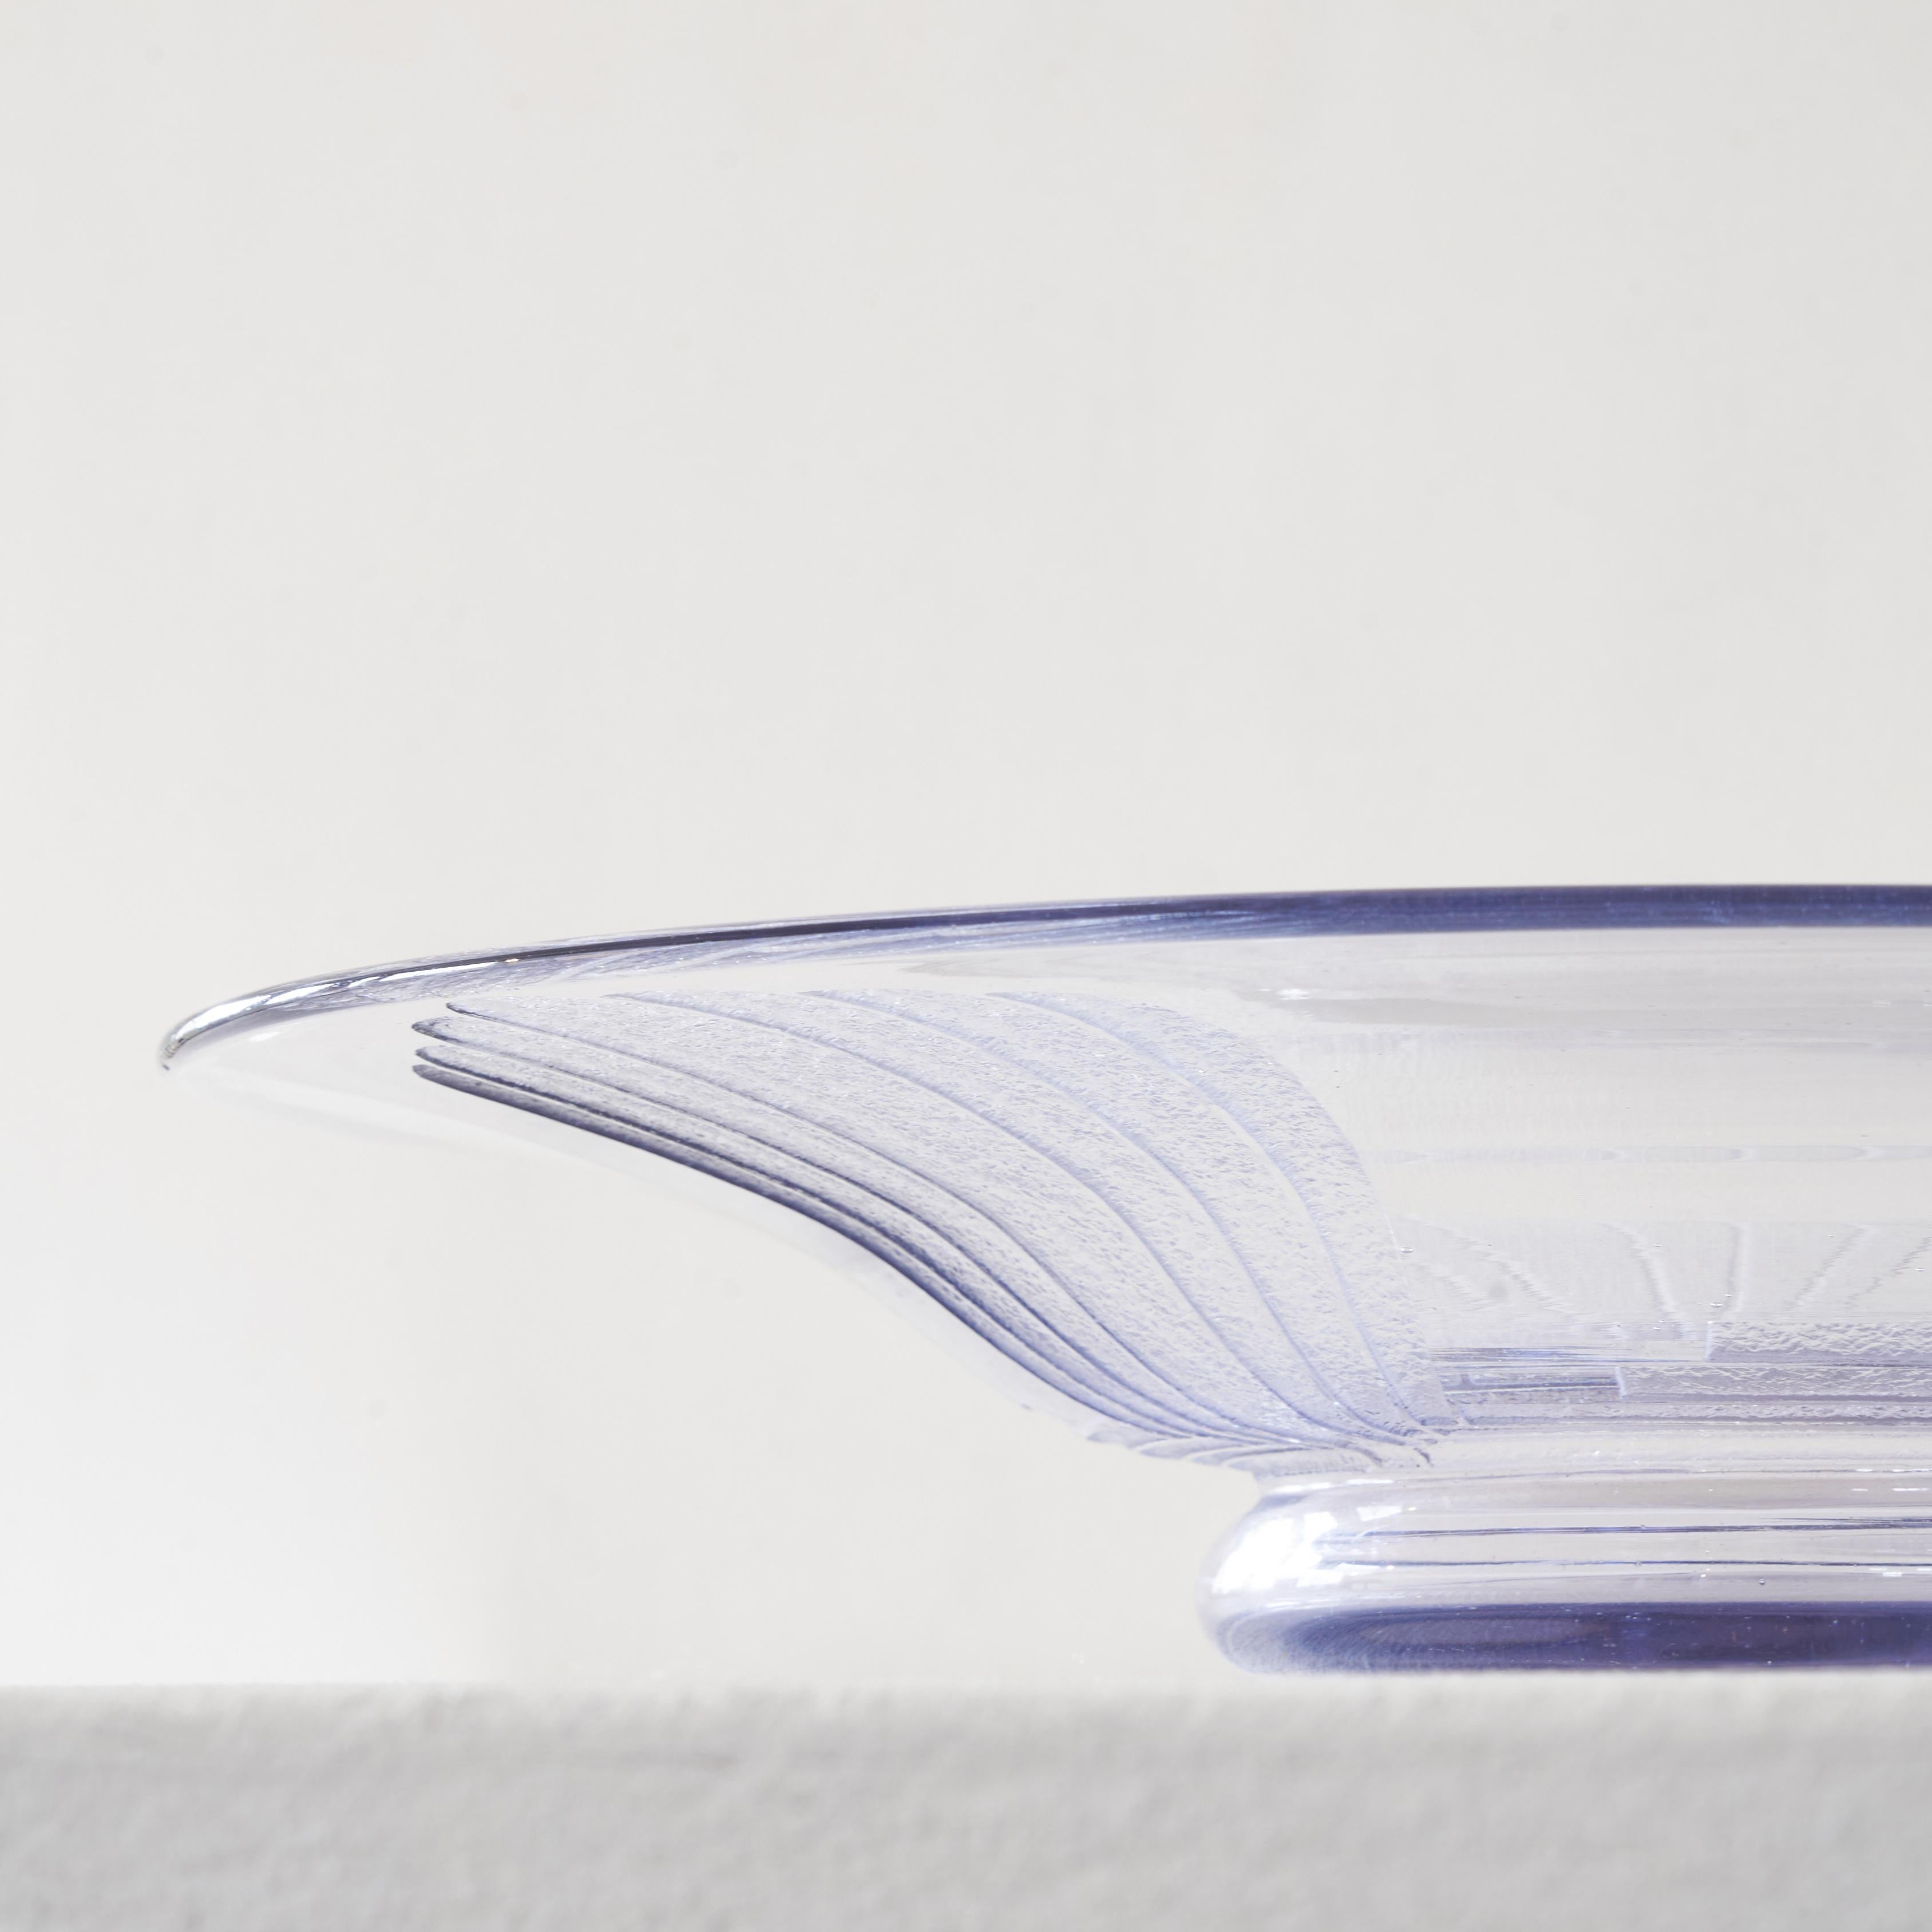 Great centerpiece in glass by 'Verreries Schneider'. Charles and Ernest Schneider, Epinay-sur-Seine, France, early 20th century. A collector's item made by one of the masters of French glass art of the last century.

A beautiful large bowl by the